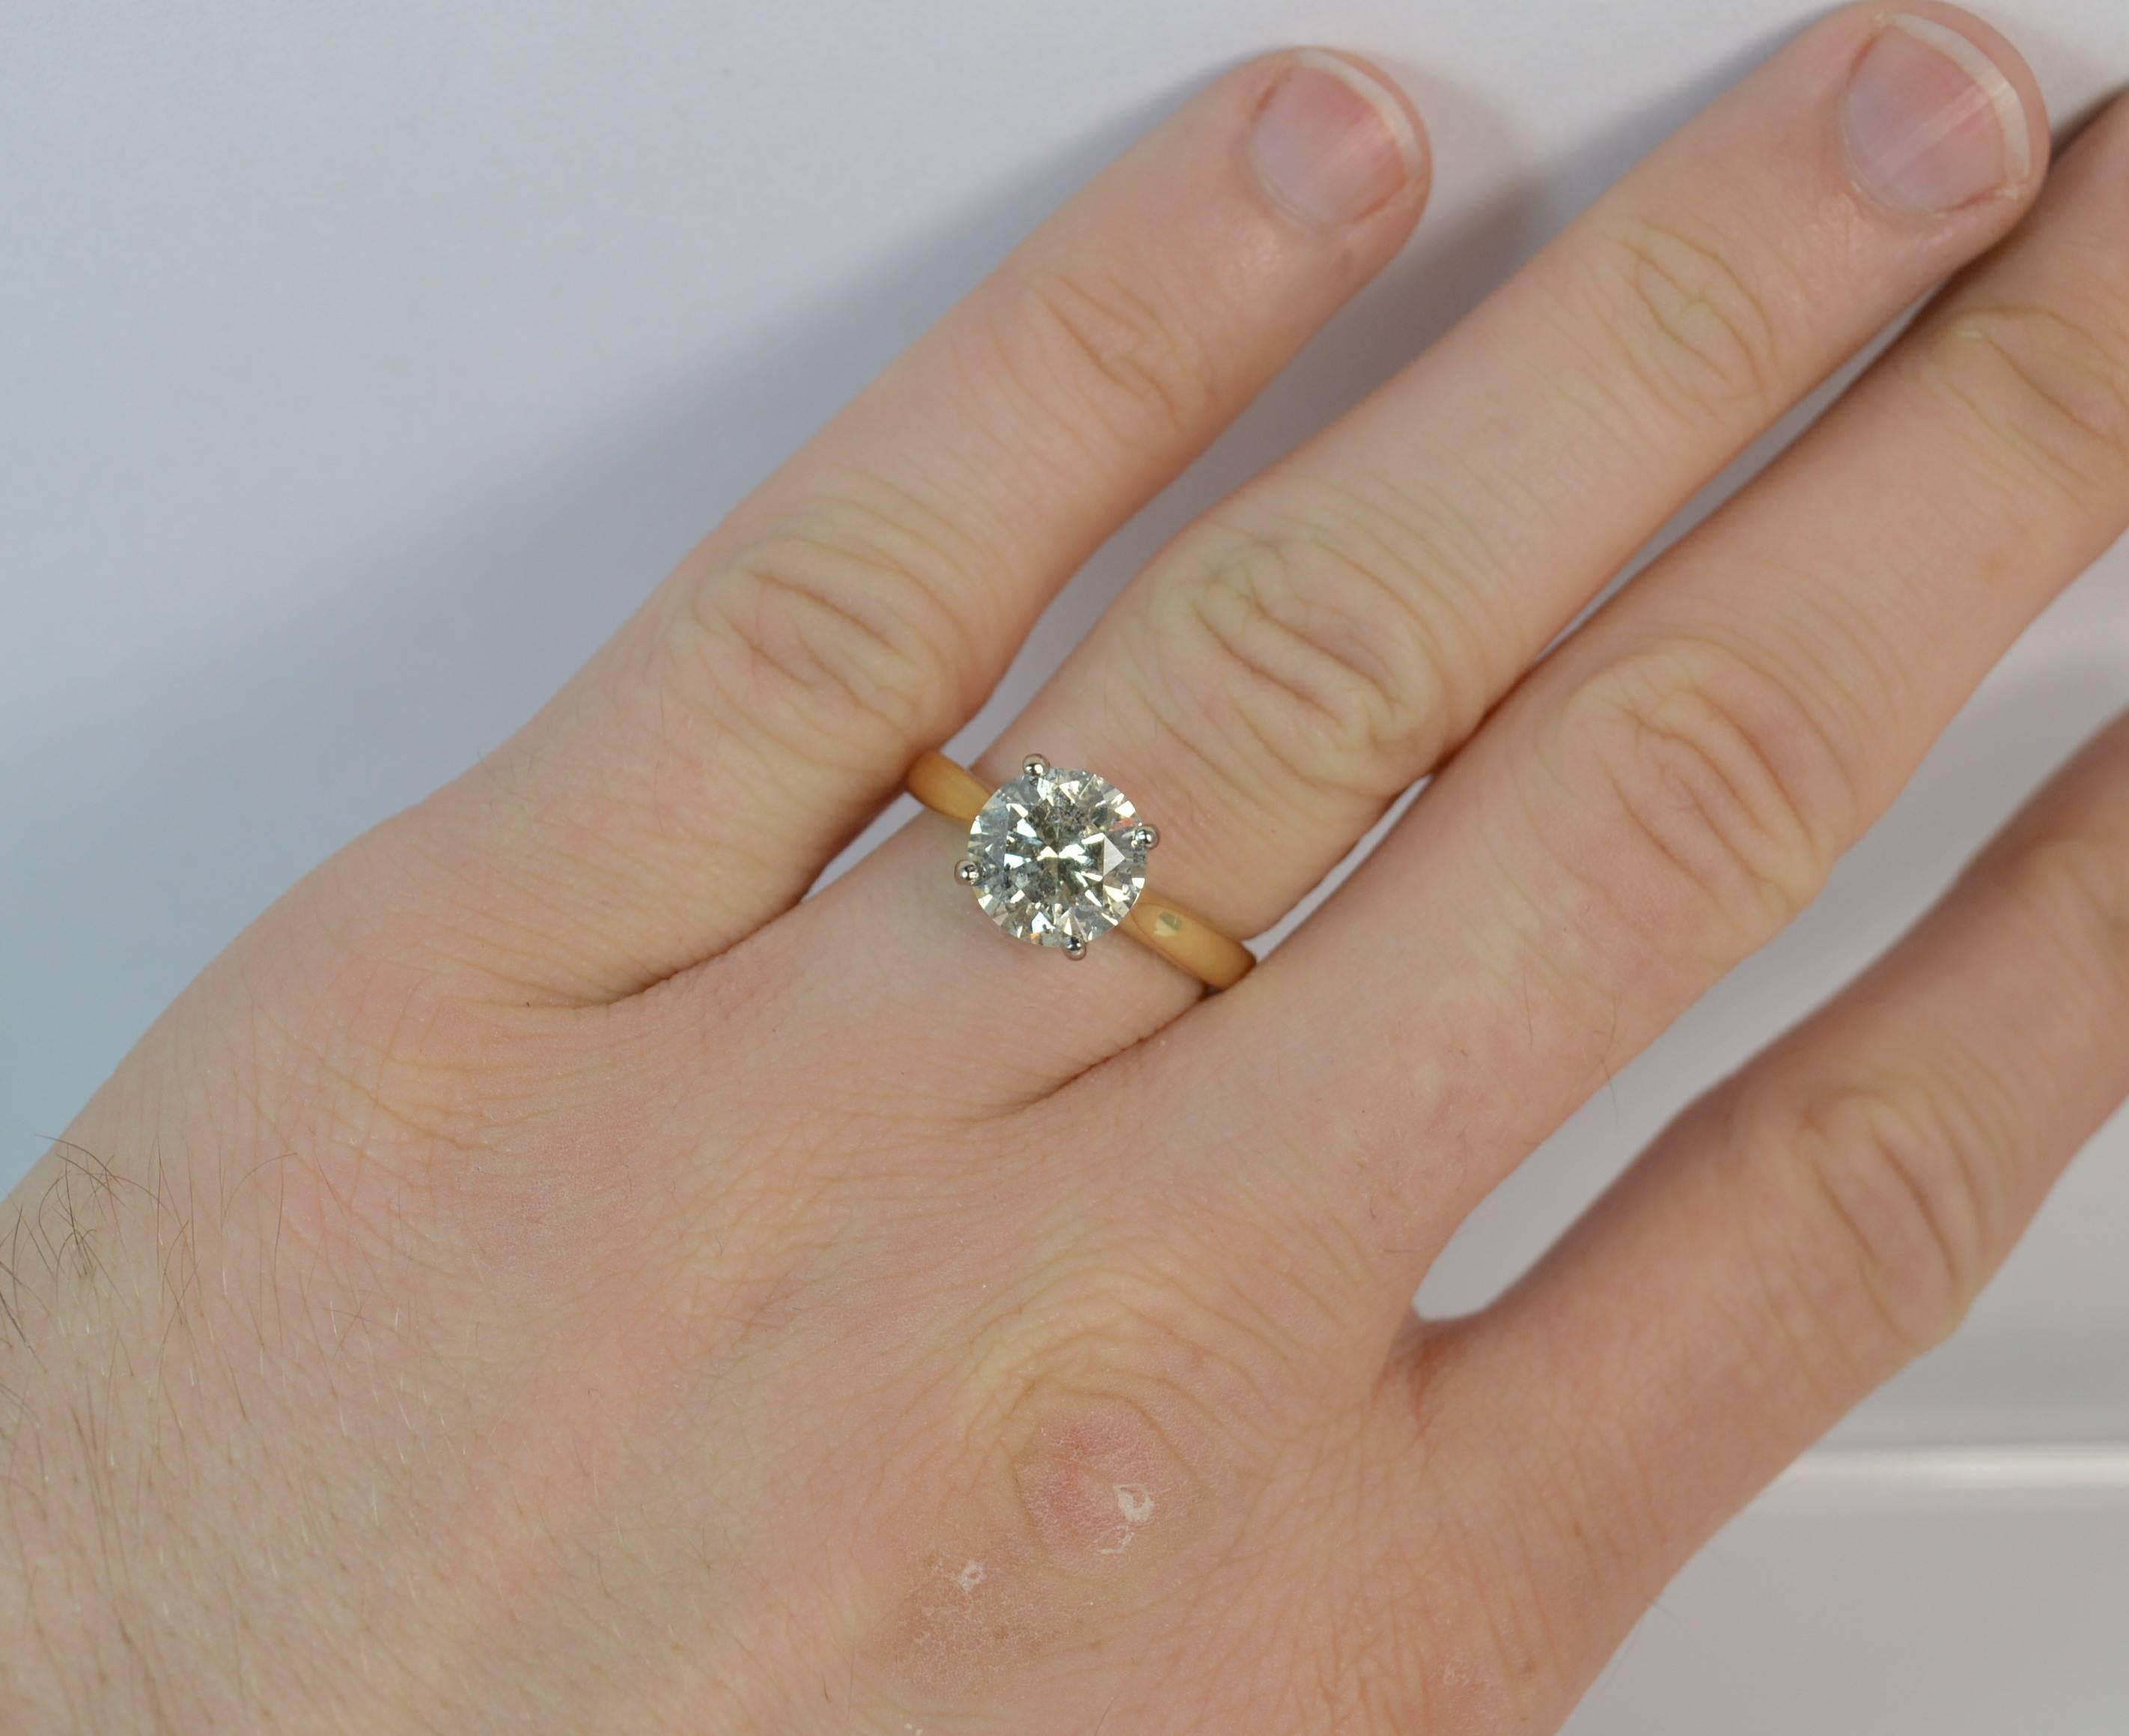 A very large natural diamond solitaire engagement ring.

​The round brilliant cut diamond measures 8.6mm in diameter and weighs 2.54 carats as confirmed to the inside of the shank.

​The diamond is i1 grade, colour j-k. Some small scattered